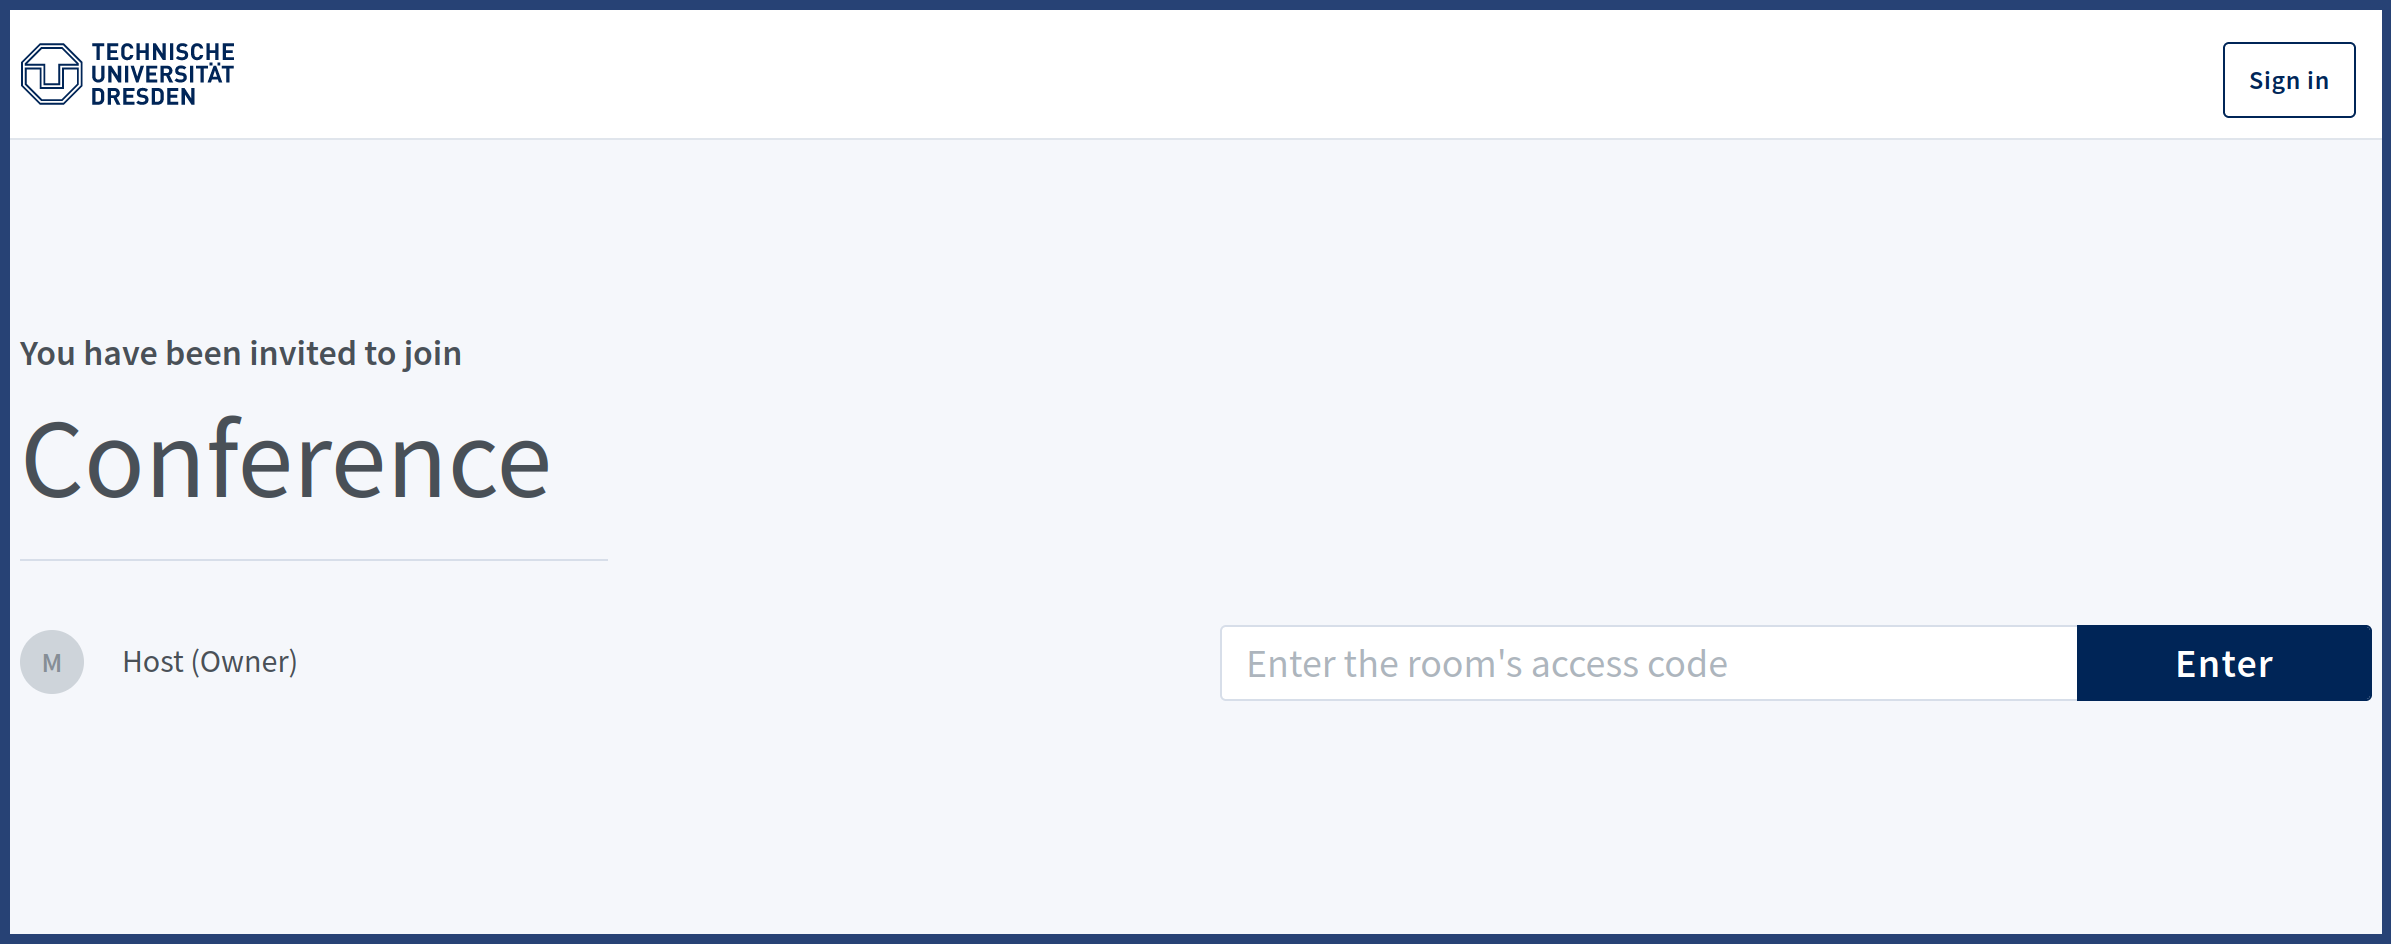 Joining page with request to enter the room access code